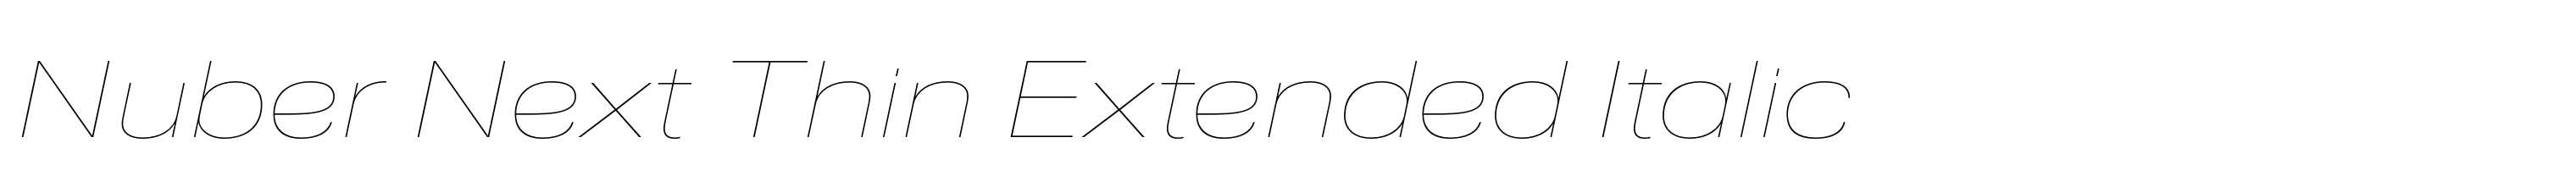 Nuber Next Thin Extended Italic